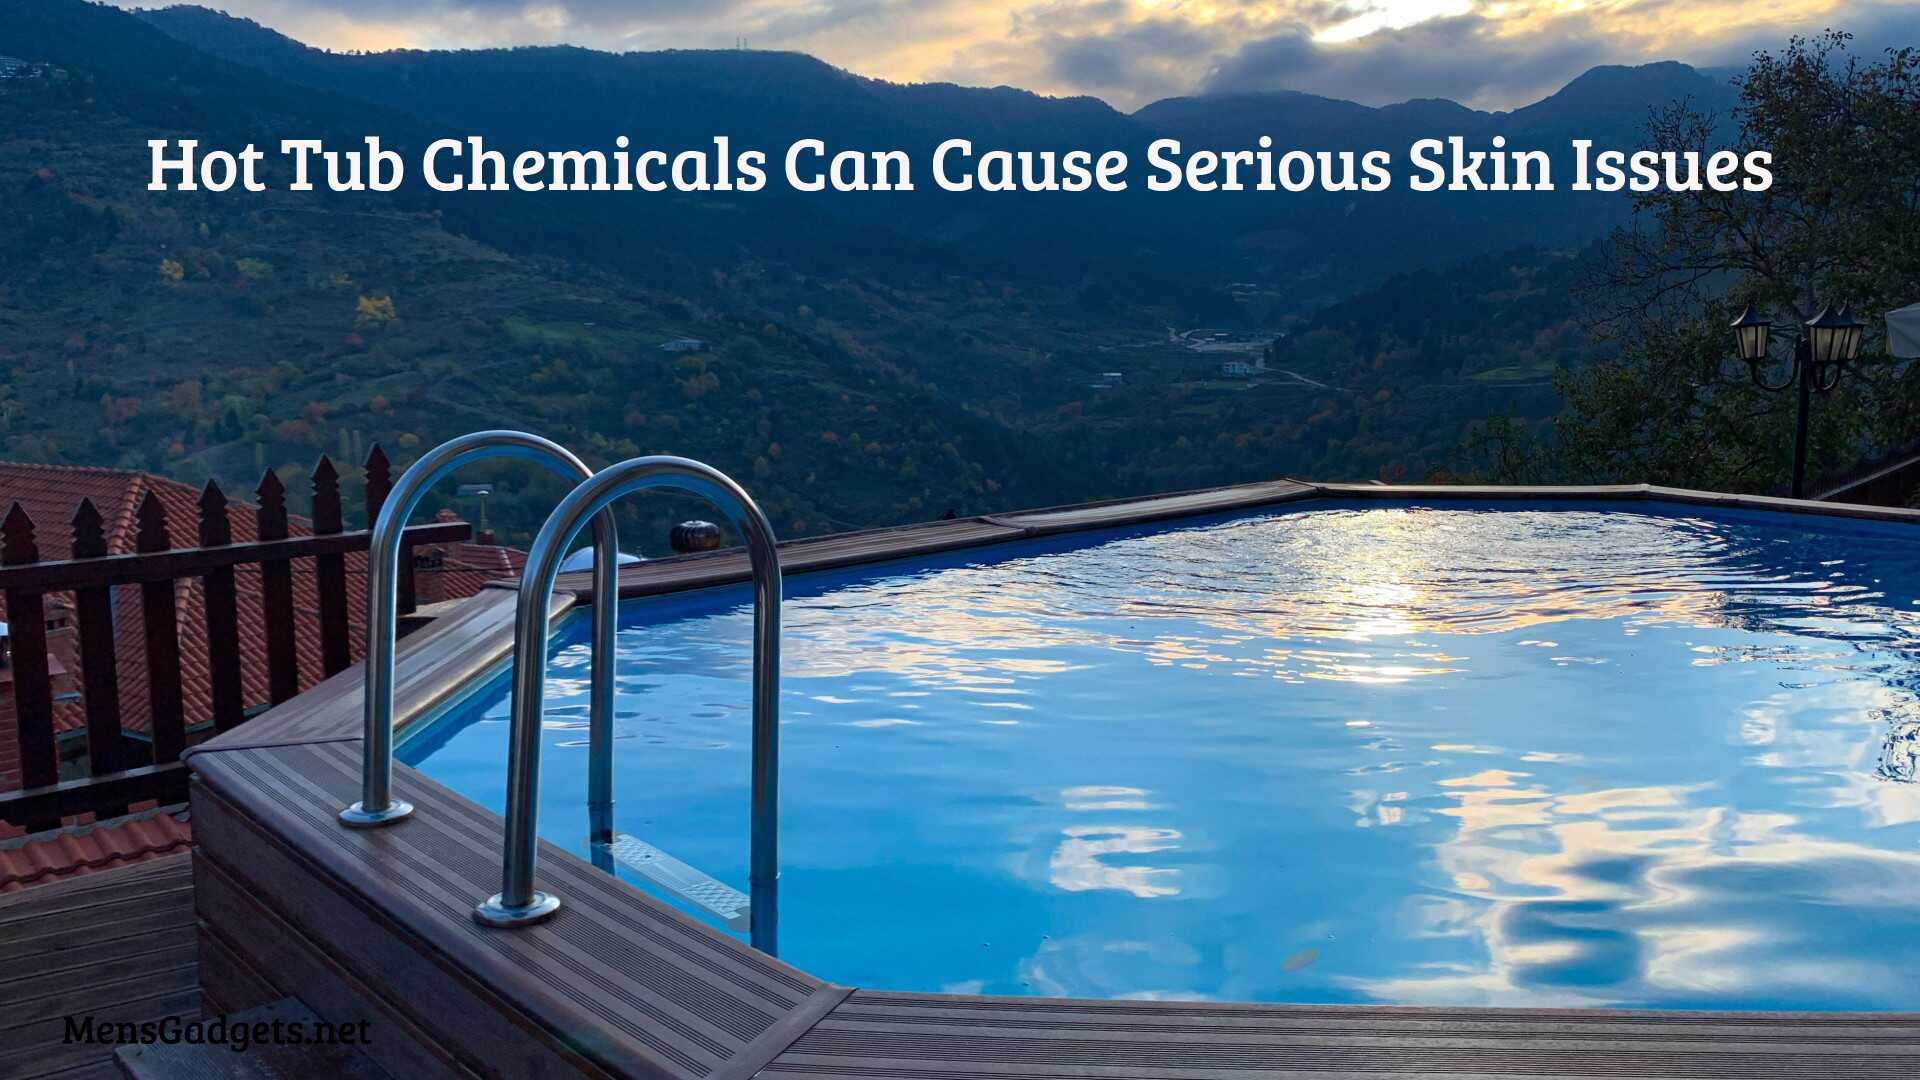 What You Need to Know About Harmful Hot Tub Chemicals